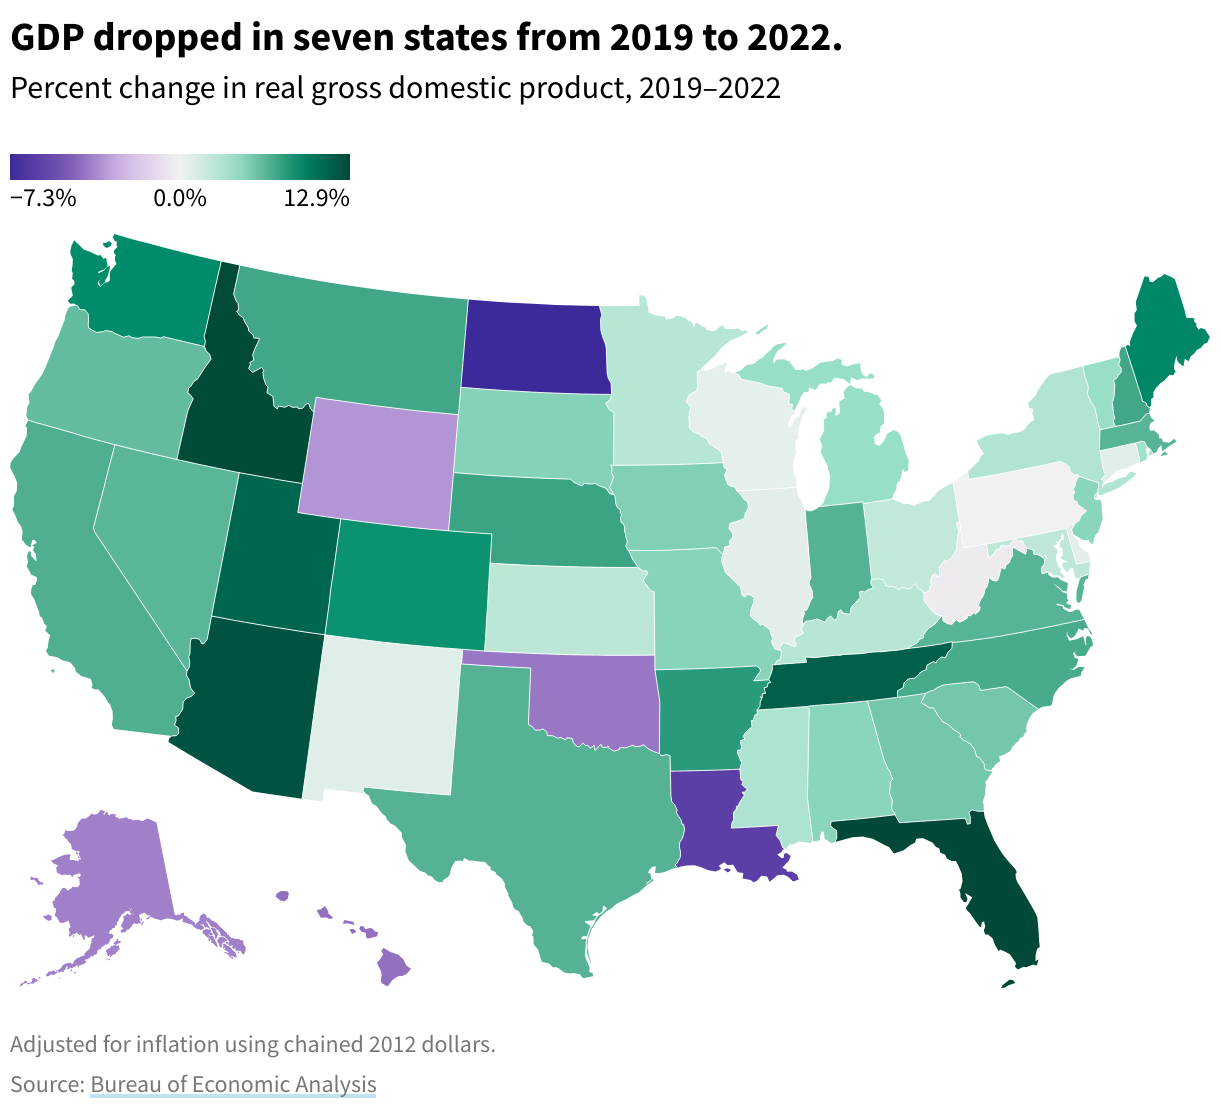 Percentage change in GDP highest in Florida, Idaho and Tennessee. 7 states had negative changes in GDP since 2019. Wyoming, Alaska, Oklahoma, Hawaii, Louisiana, and North Dakota had the greatest percentage decreases in GDP.